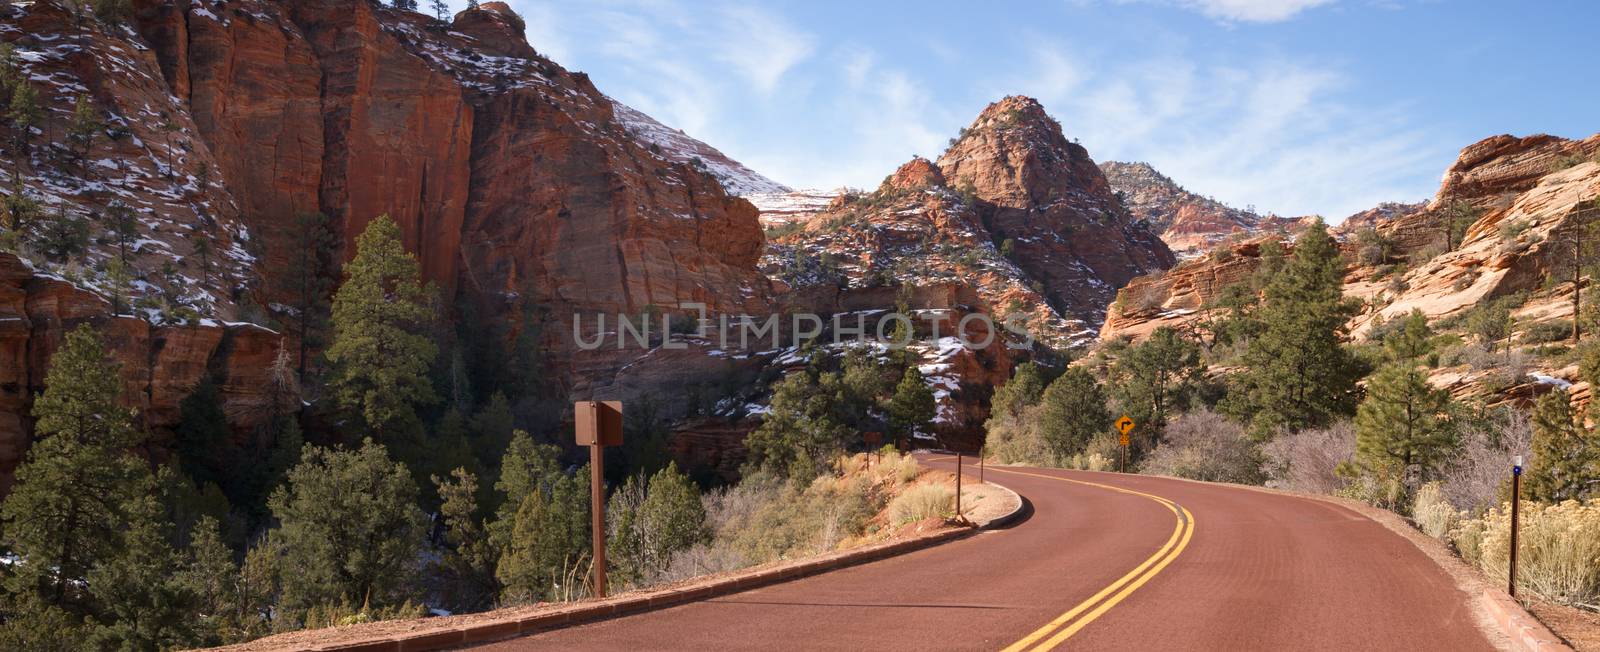 Two Lane Road Mountain Buttes Zion National Park Desert Southwes by ChrisBoswell